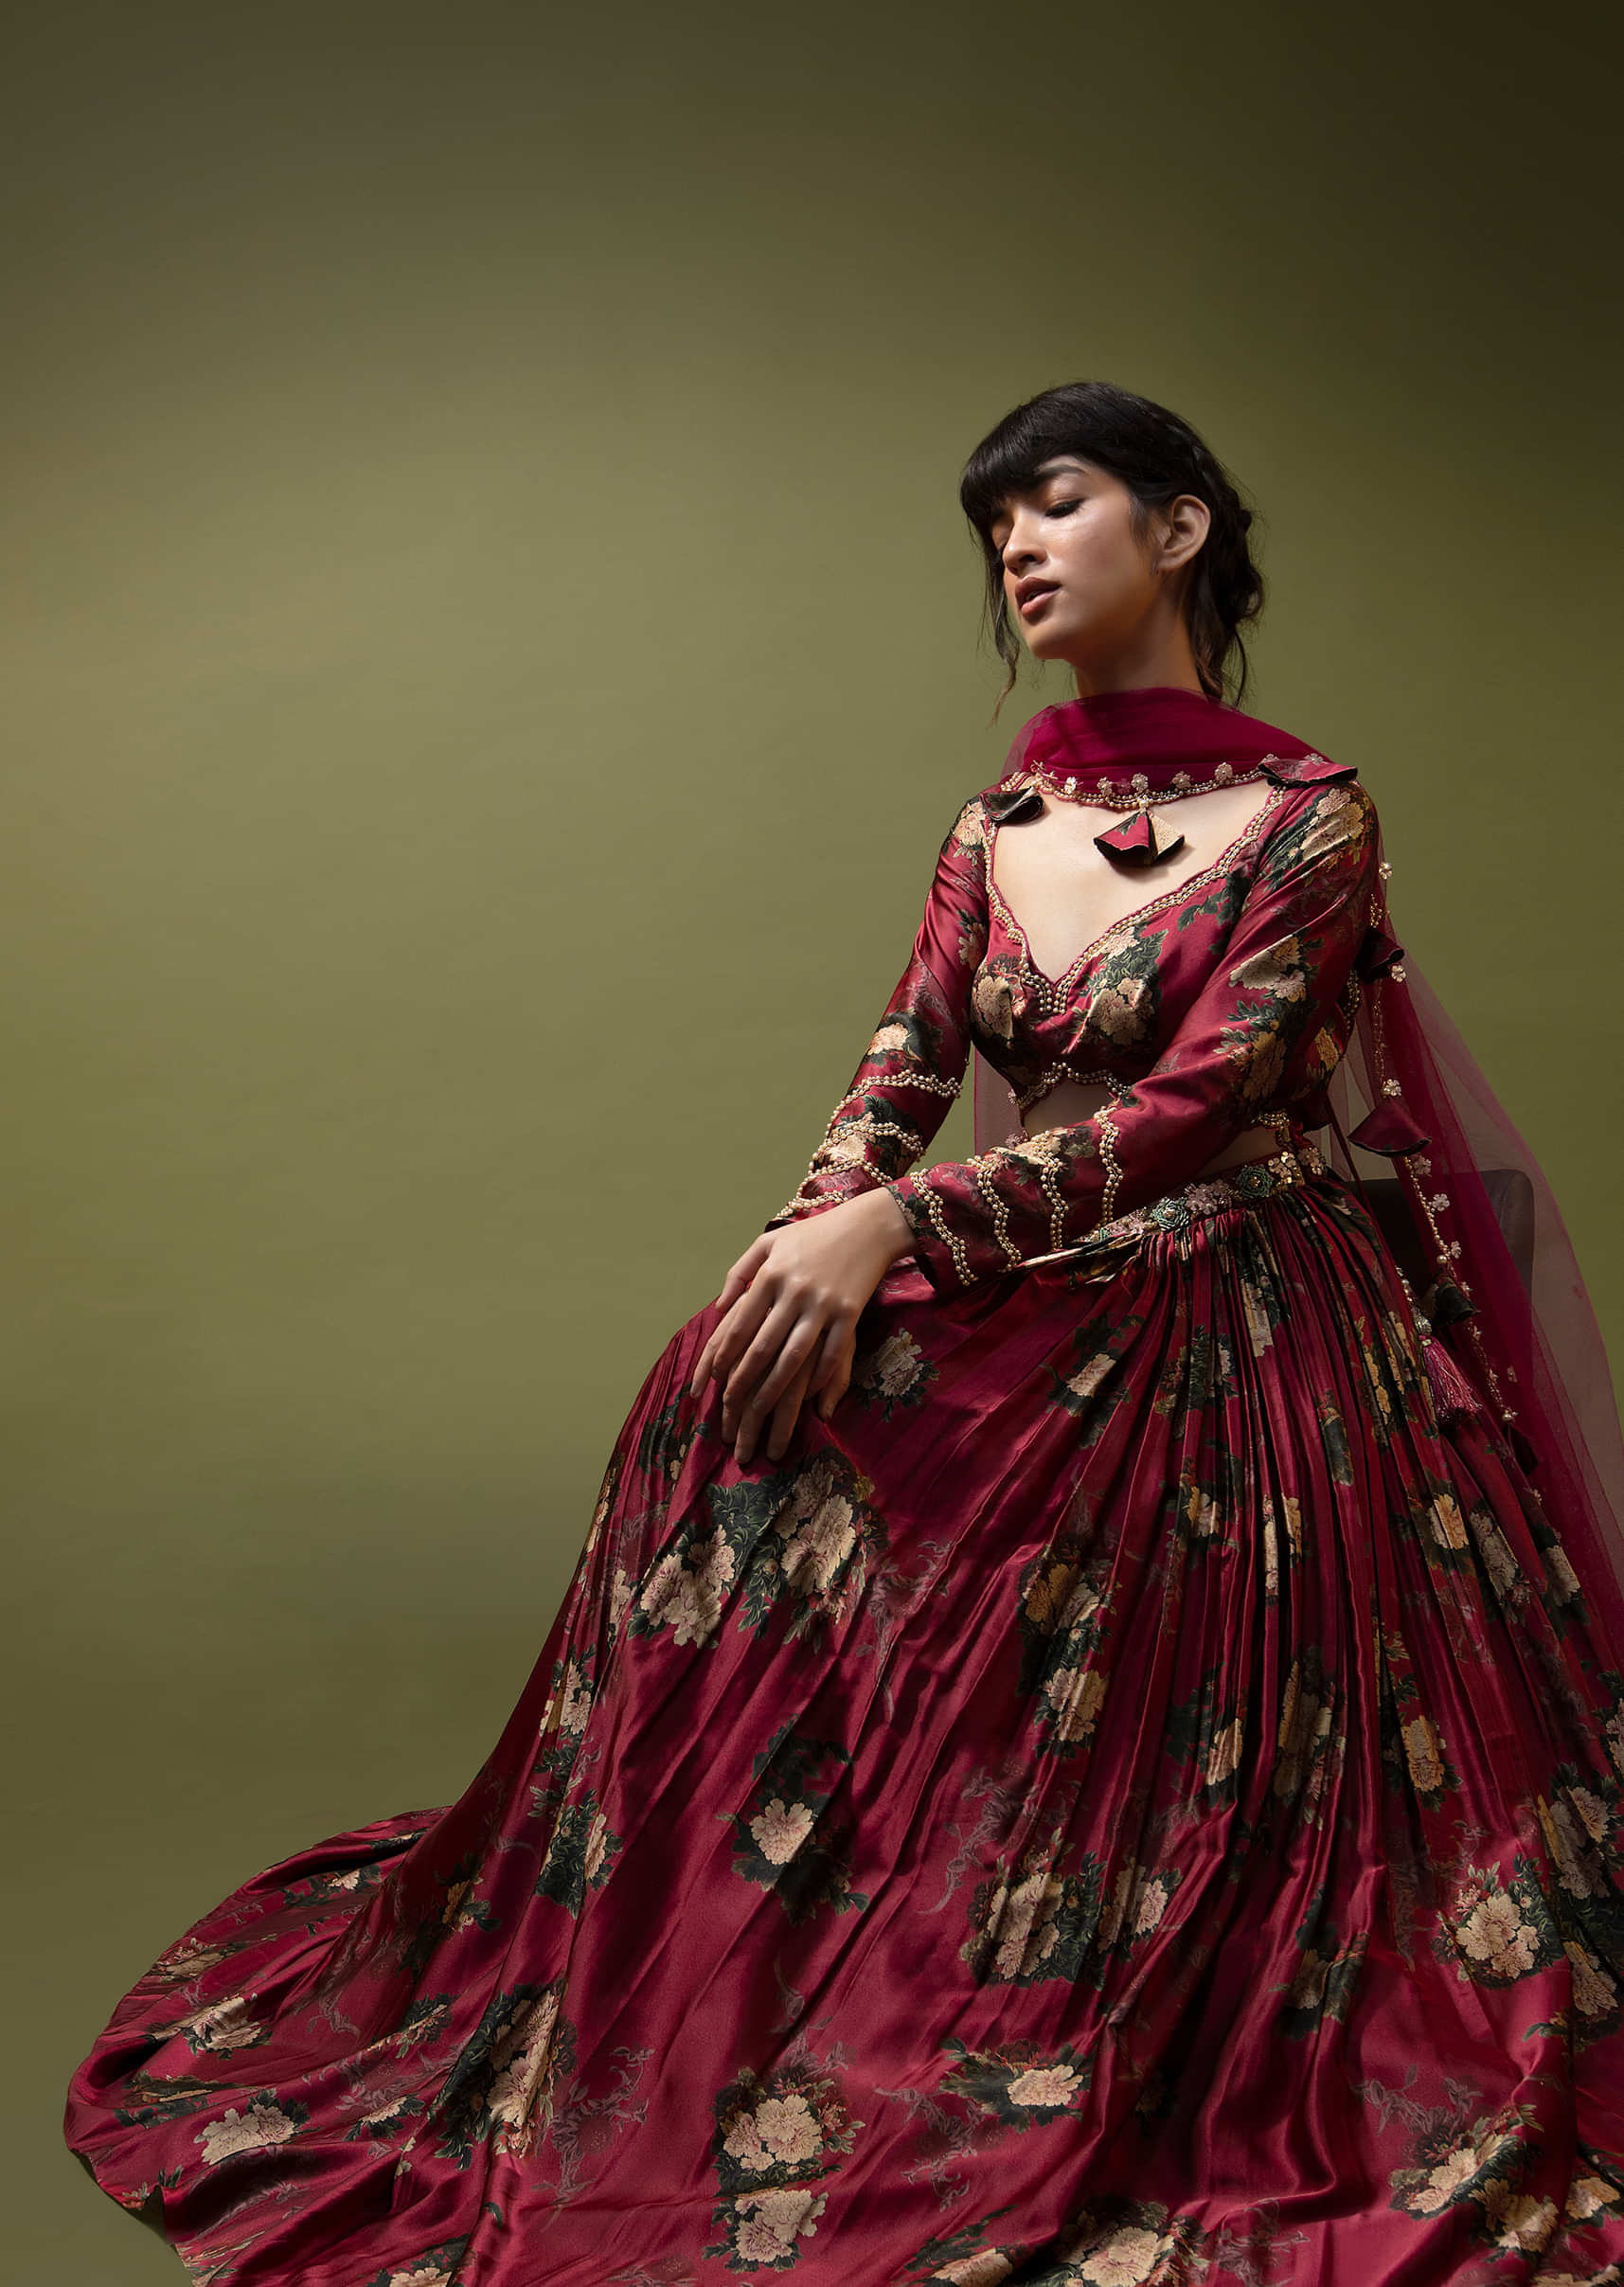 Cranberry Red Anarkali Suit In Floral Printed Satin With Front Cut Out And Sequin Embroidery  